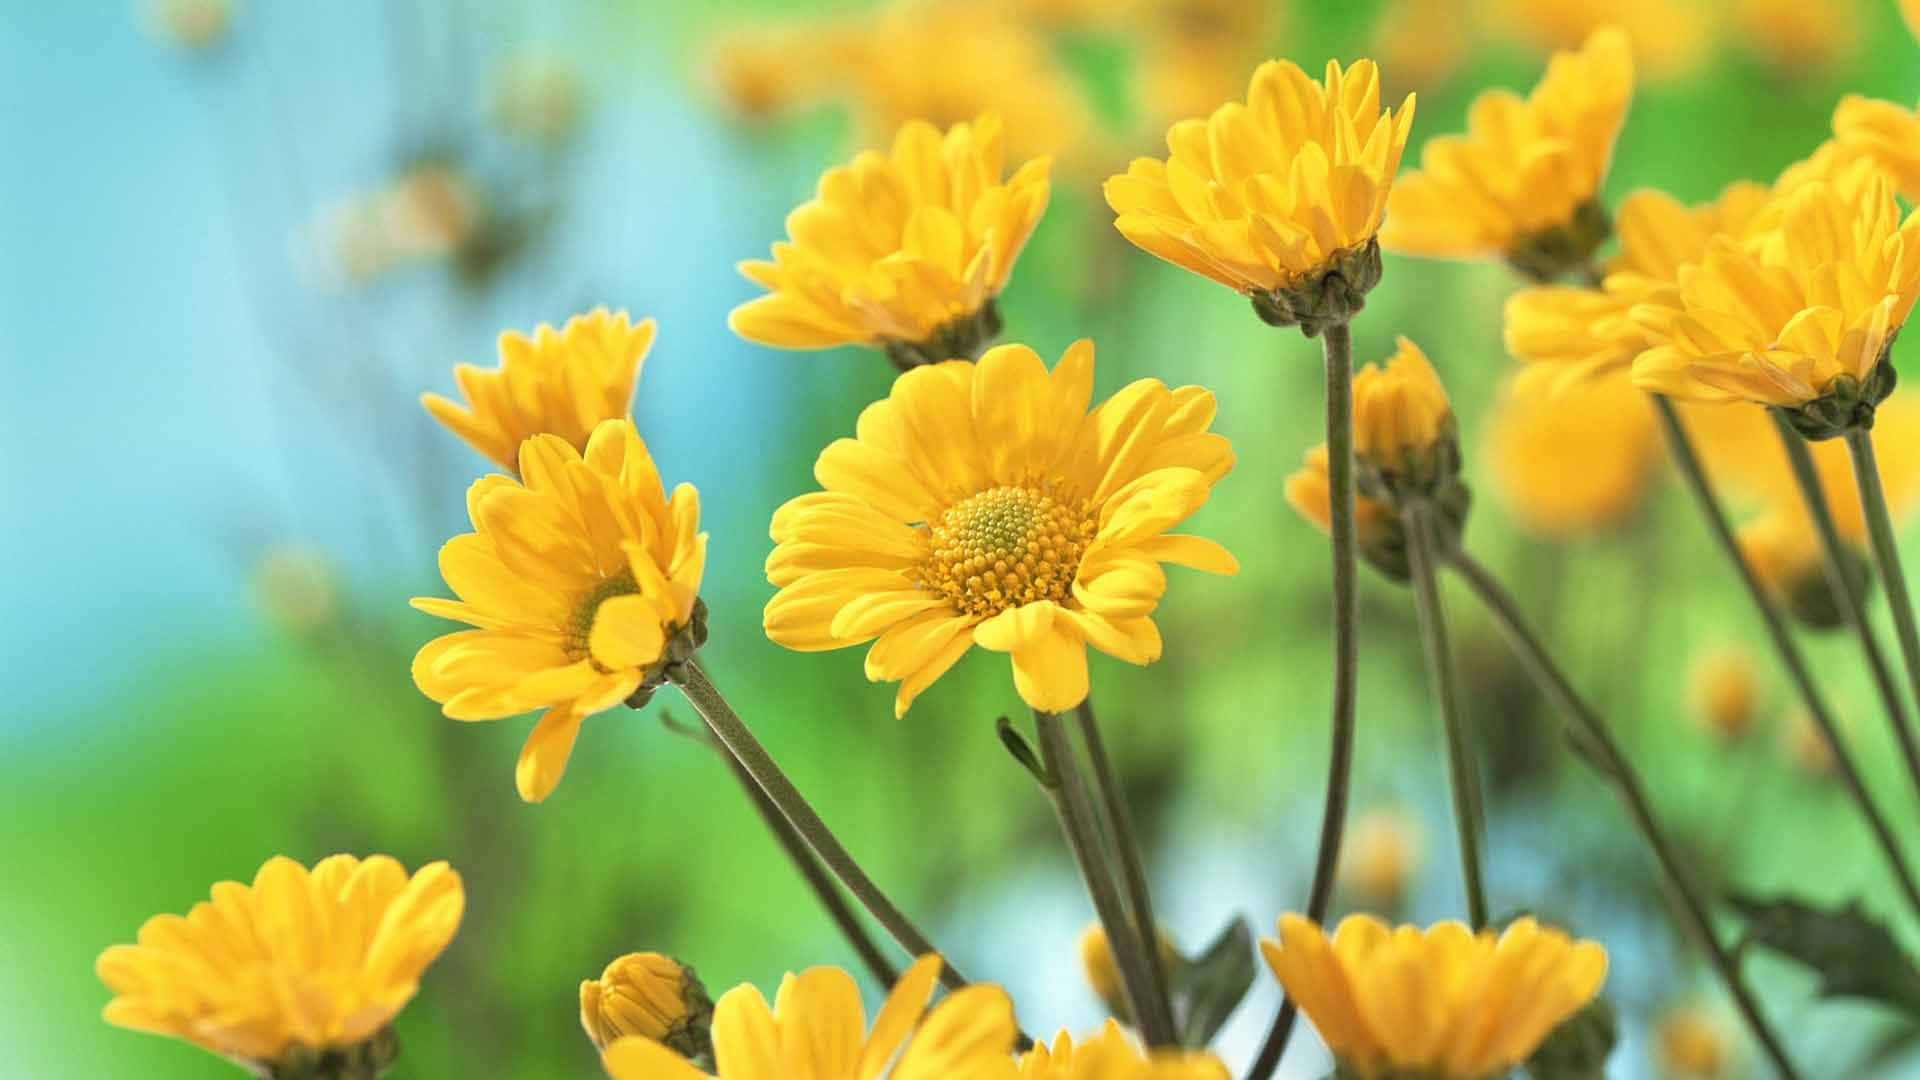 Delicate Beauty On Your Tech - Flowers Laptop Background